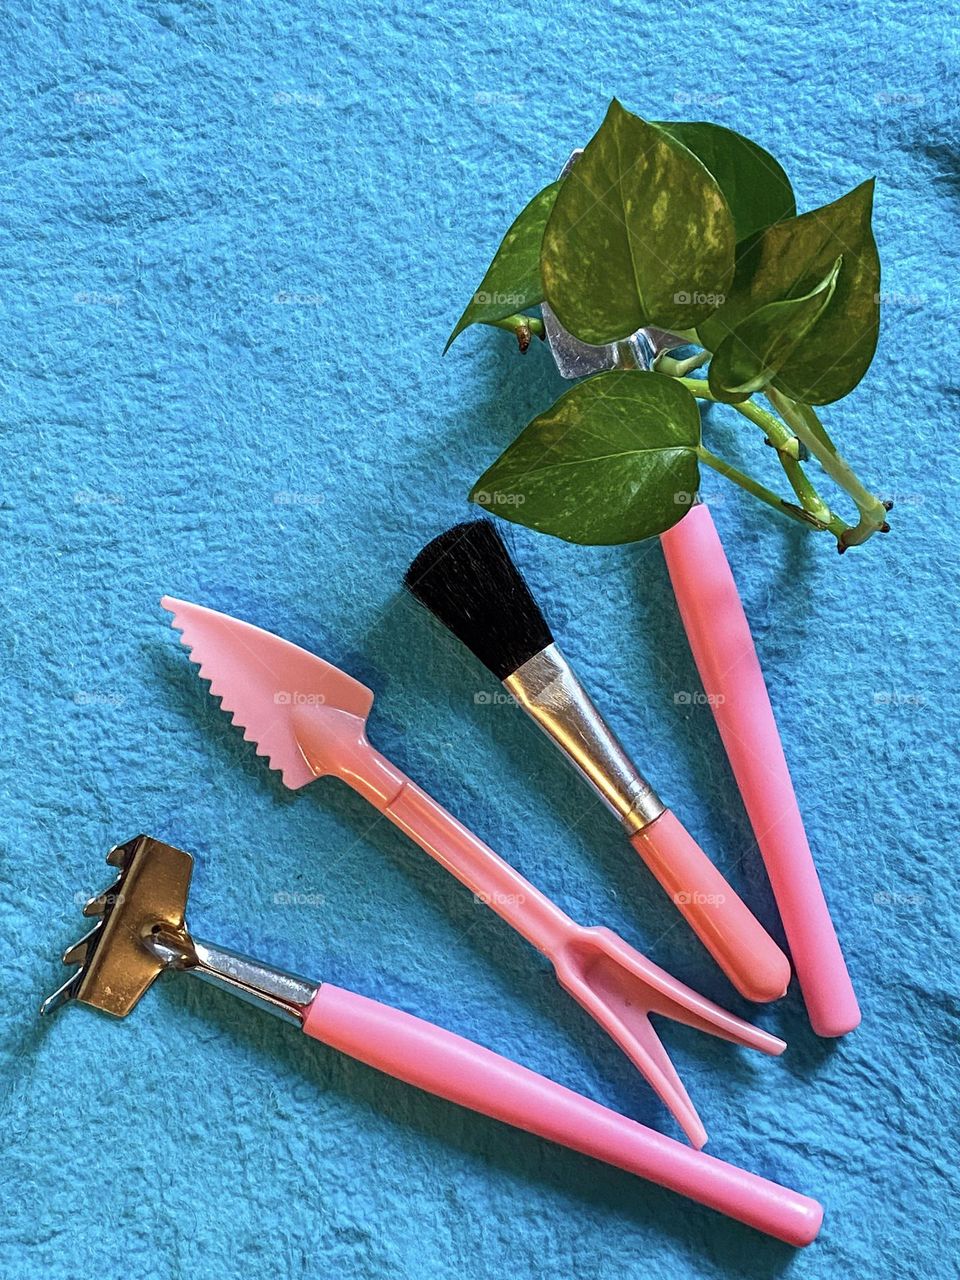 Mini gardening tools in pink against sky blue background with new cutting green leaves.